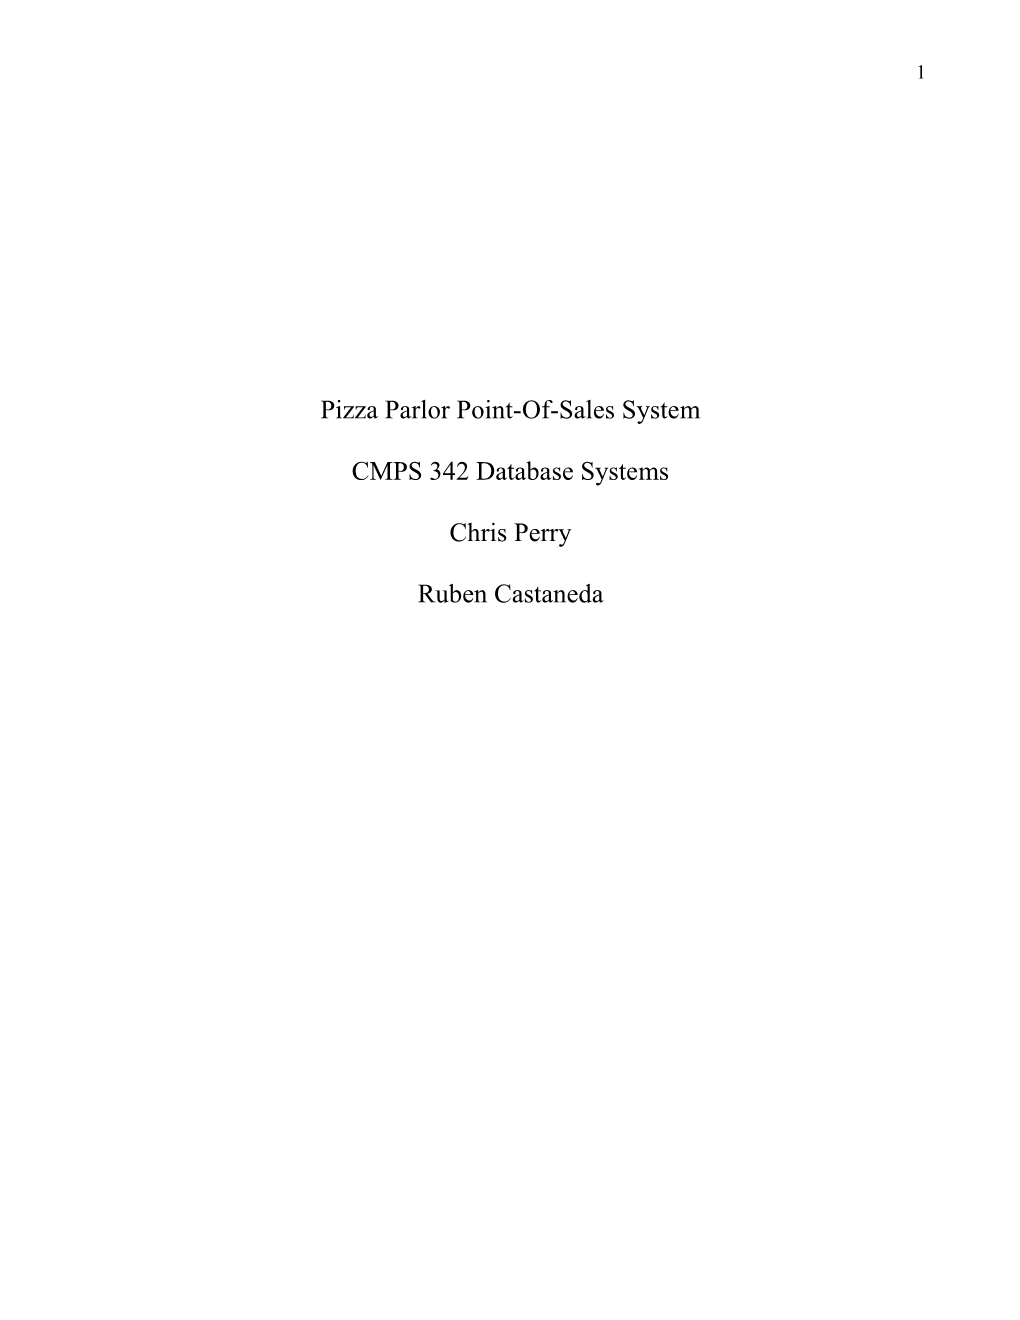 Pizza Parlor Point-Of-Sales System CMPS 342 Database